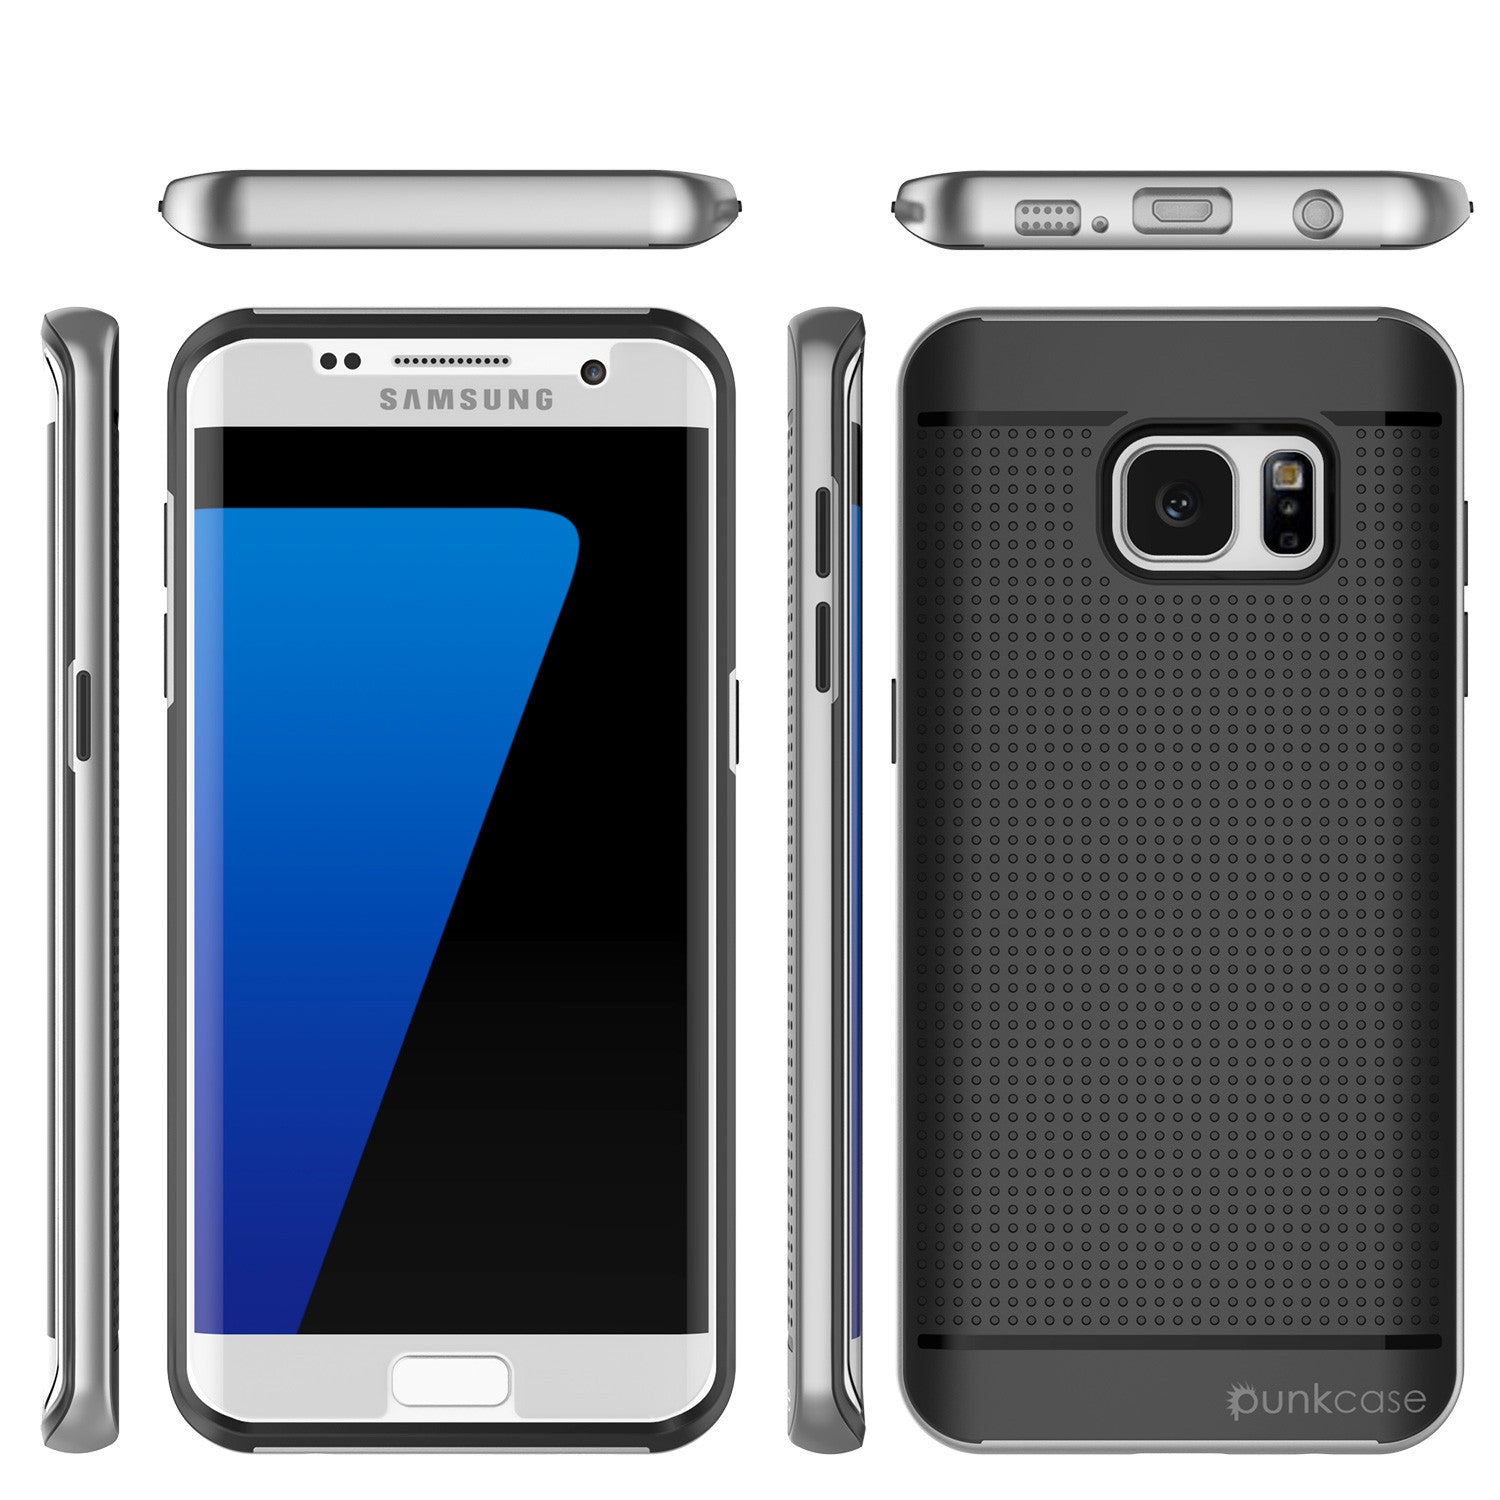 Galaxy S7 Edge Case, Punkcase Stealth Silver Series Hybrid 3-Piece Shockproof Dual Layer Cover